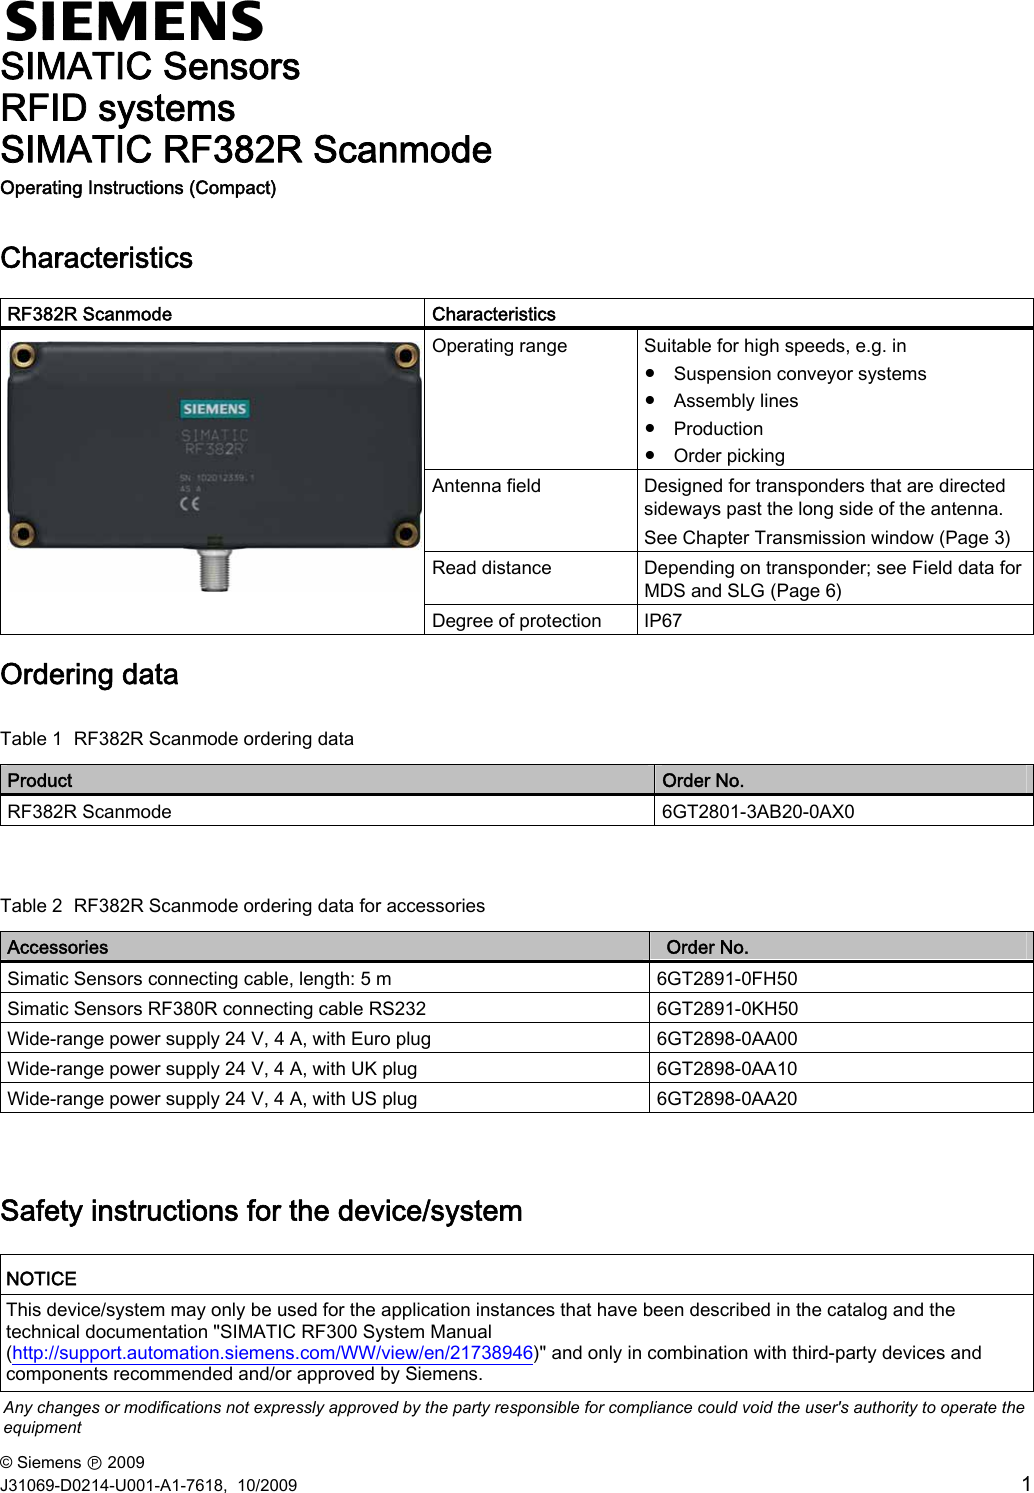 © Siemens Ⓟ 2009 J31069-D0214-U001-A1-7618,  10/2009  1  SIMATIC Sensors RFID systems SIMATIC RF382R Scanmode Operating Instructions (Compact)   Characteristics  RF382R Scanmode  Characteristics Operating range  Suitable for high speeds, e.g. in  ● Suspension conveyor systems ● Assembly lines ● Production ● Order picking Antenna field  Designed for transponders that are directed sideways past the long side of the antenna. See Chapter Transmission window (Page 3) Read distance  Depending on transponder; see Field data for MDS and SLG (Page 6)  Degree of protection  IP67 Ordering data Table 1  RF382R Scanmode ordering data Product  Order No. RF382R Scanmode  6GT2801-3AB20-0AX0  Table 2  RF382R Scanmode ordering data for accessories Accessories  ‎Order No. Simatic Sensors connecting cable, length: 5 m  6GT2891-0FH50 Simatic Sensors RF380R connecting cable RS232  6GT2891-0KH50 Wide-range power supply 24 V, 4 A, with Euro plug  6GT2898-0AA00 Wide-range power supply 24 V, 4 A, with UK plug  6GT2898-0AA10 Wide-range power supply 24 V, 4 A, with US plug  6GT2898-0AA20  Safety instructions for the device/system  NOTICE This device/system may only be used for the application instances that have been described in the catalog and the technical documentation &quot;SIMATIC RF300 System Manual (http://support.automation.siemens.com/WW/view/en/21738946)&quot; and only in combination with third-party devices and components recommended and/or approved by Siemens.  Any changes or modifications not expressly approved by the party responsible for compliance could void the user&apos;s authority to operate the equipment